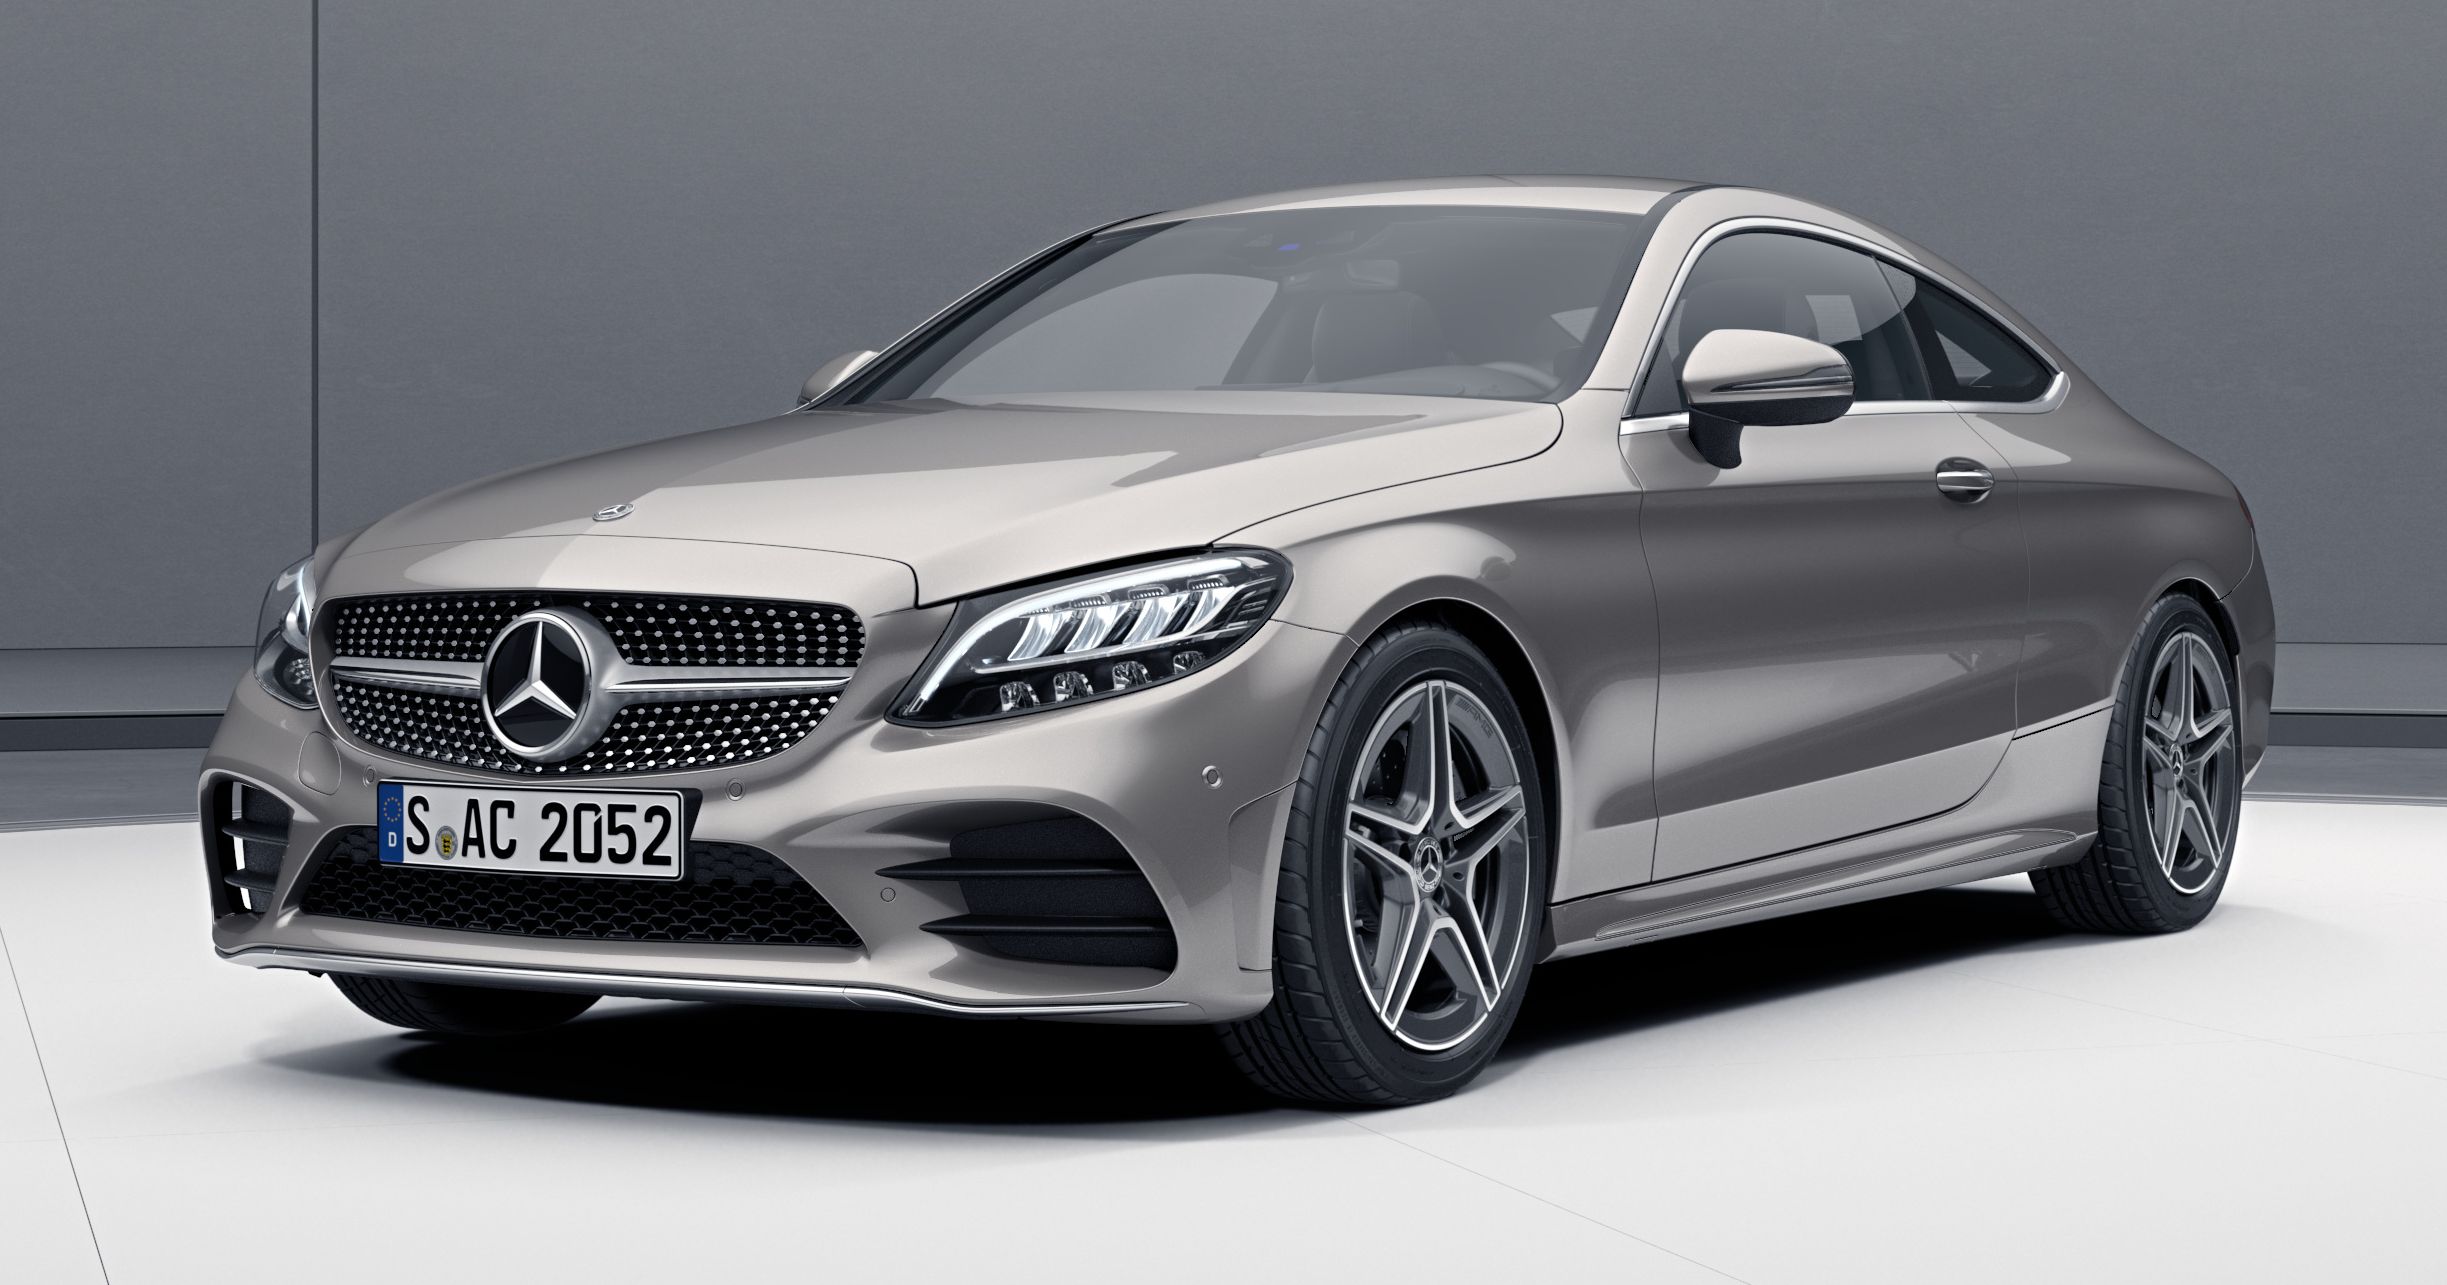 Mercedes benz class 2020. Mercedes-Benz c-class c200. Mercedes c200 Coupe 2020. Mercedes c200 Coupe AMG. Мерседес c class Coupe 2020.